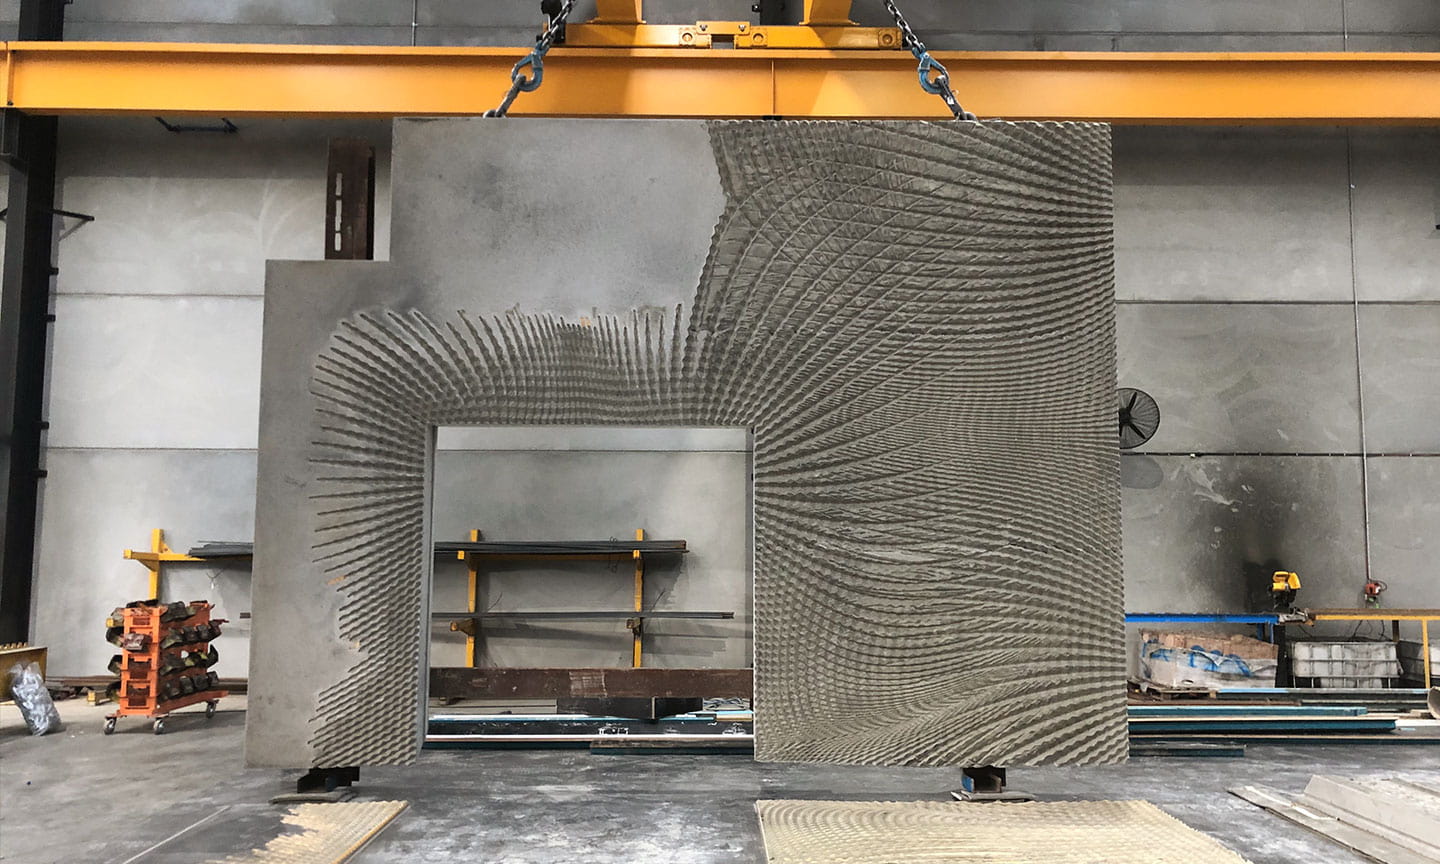 Pre-cast concrete walls featuring 3D pattern works stored in warehouse facility